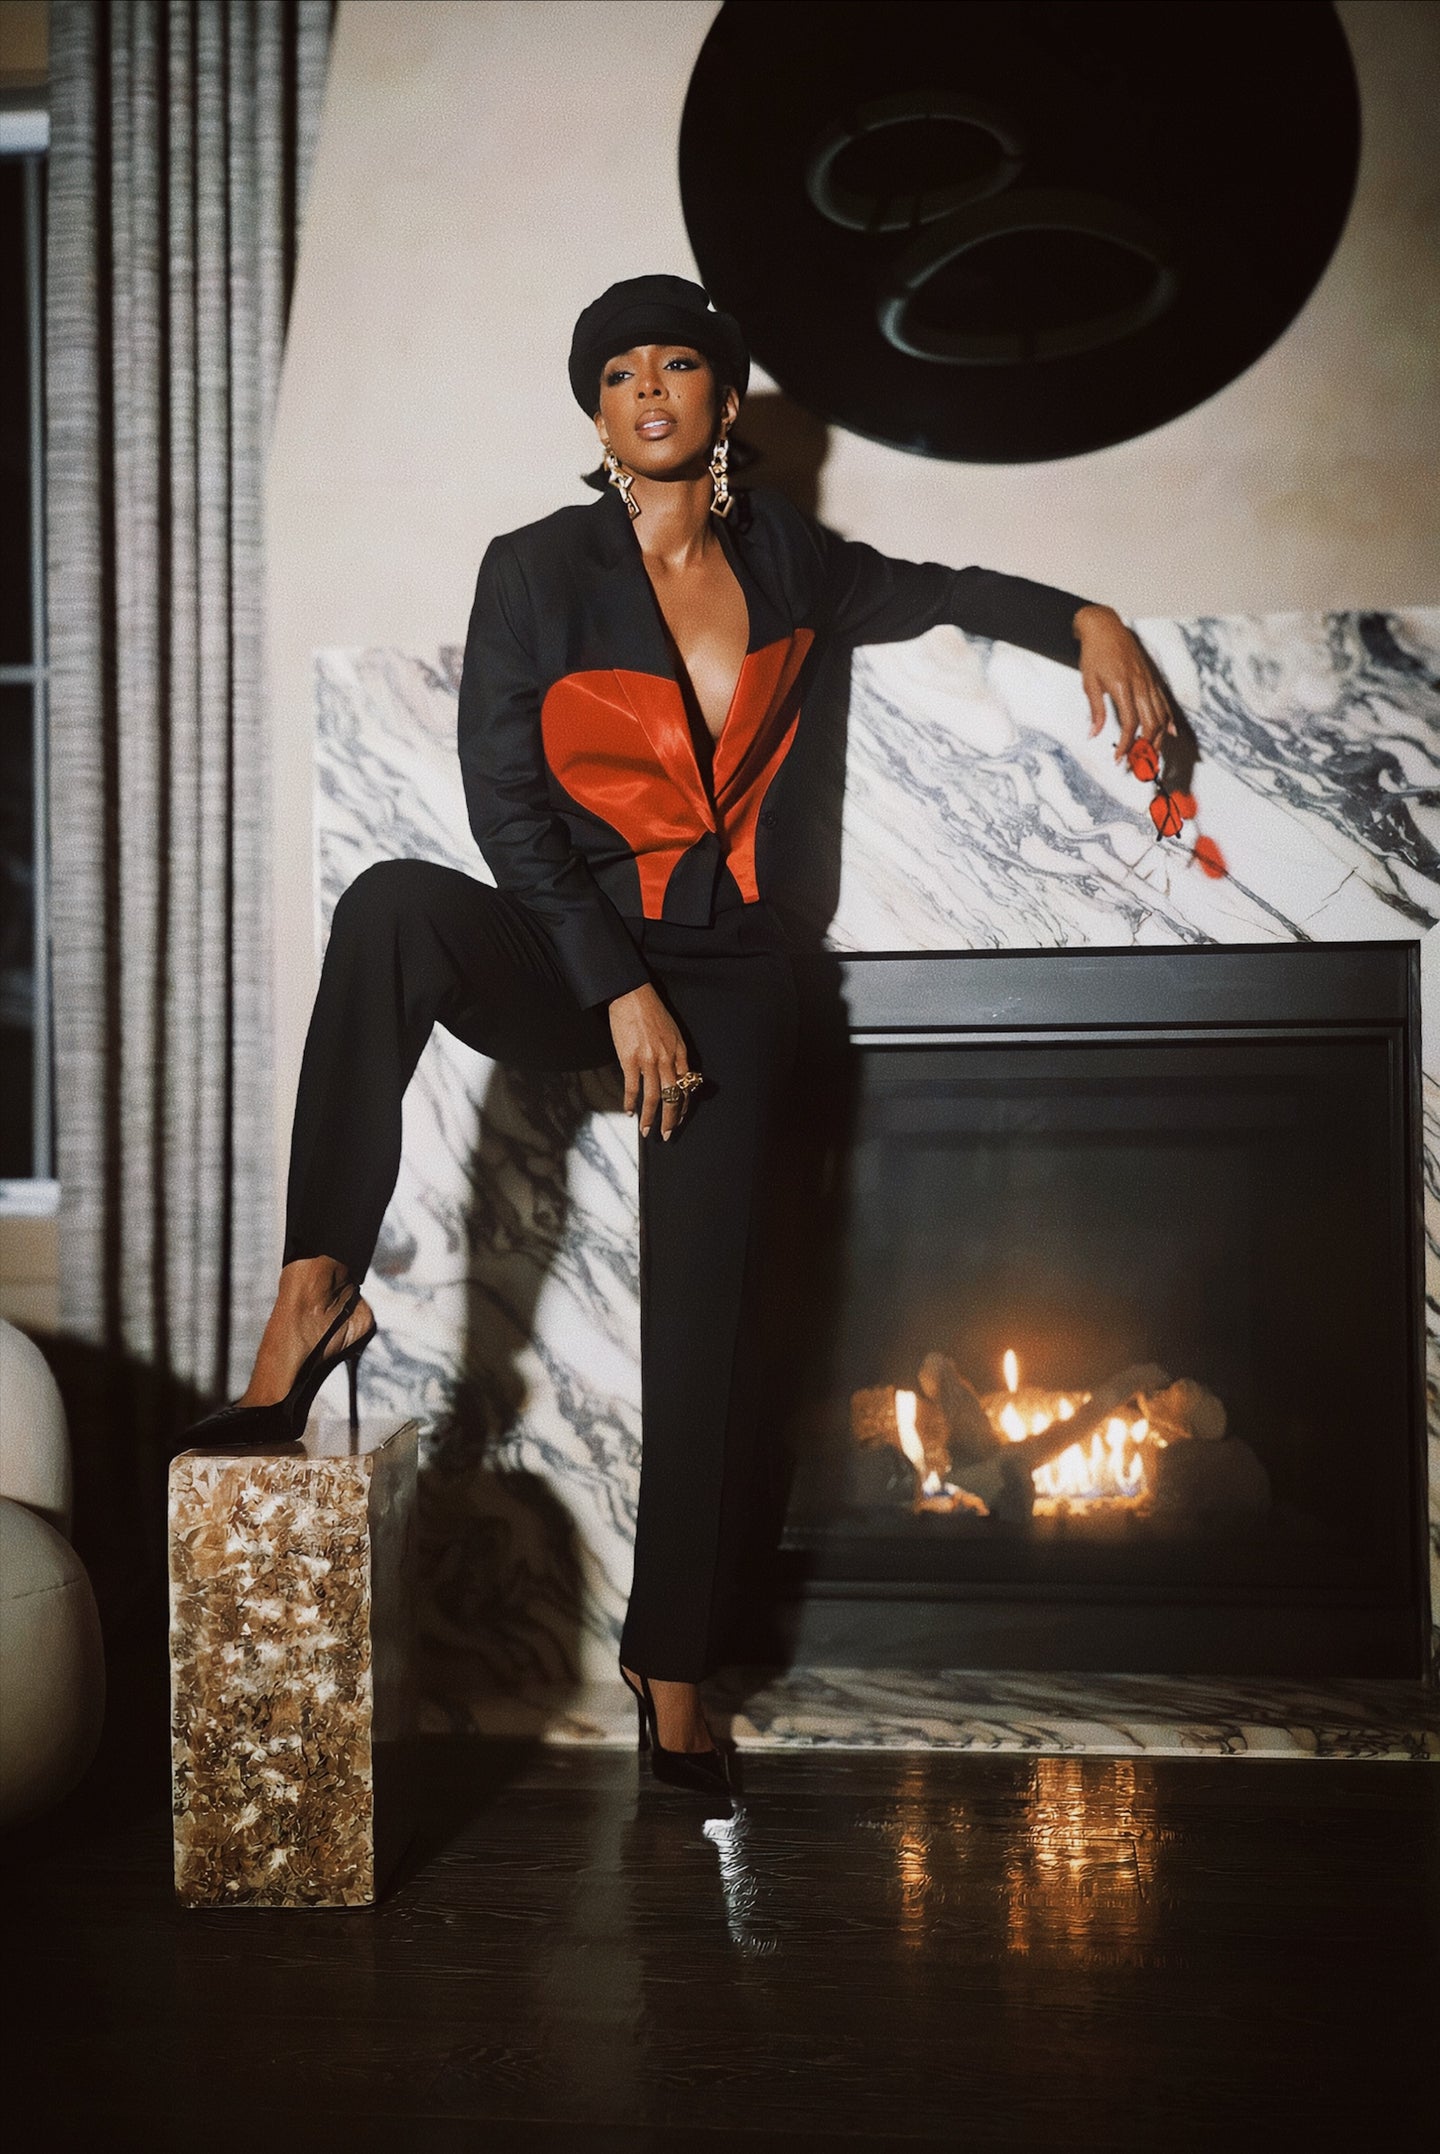 SHOP THE LOOK KELLY ROWLAND